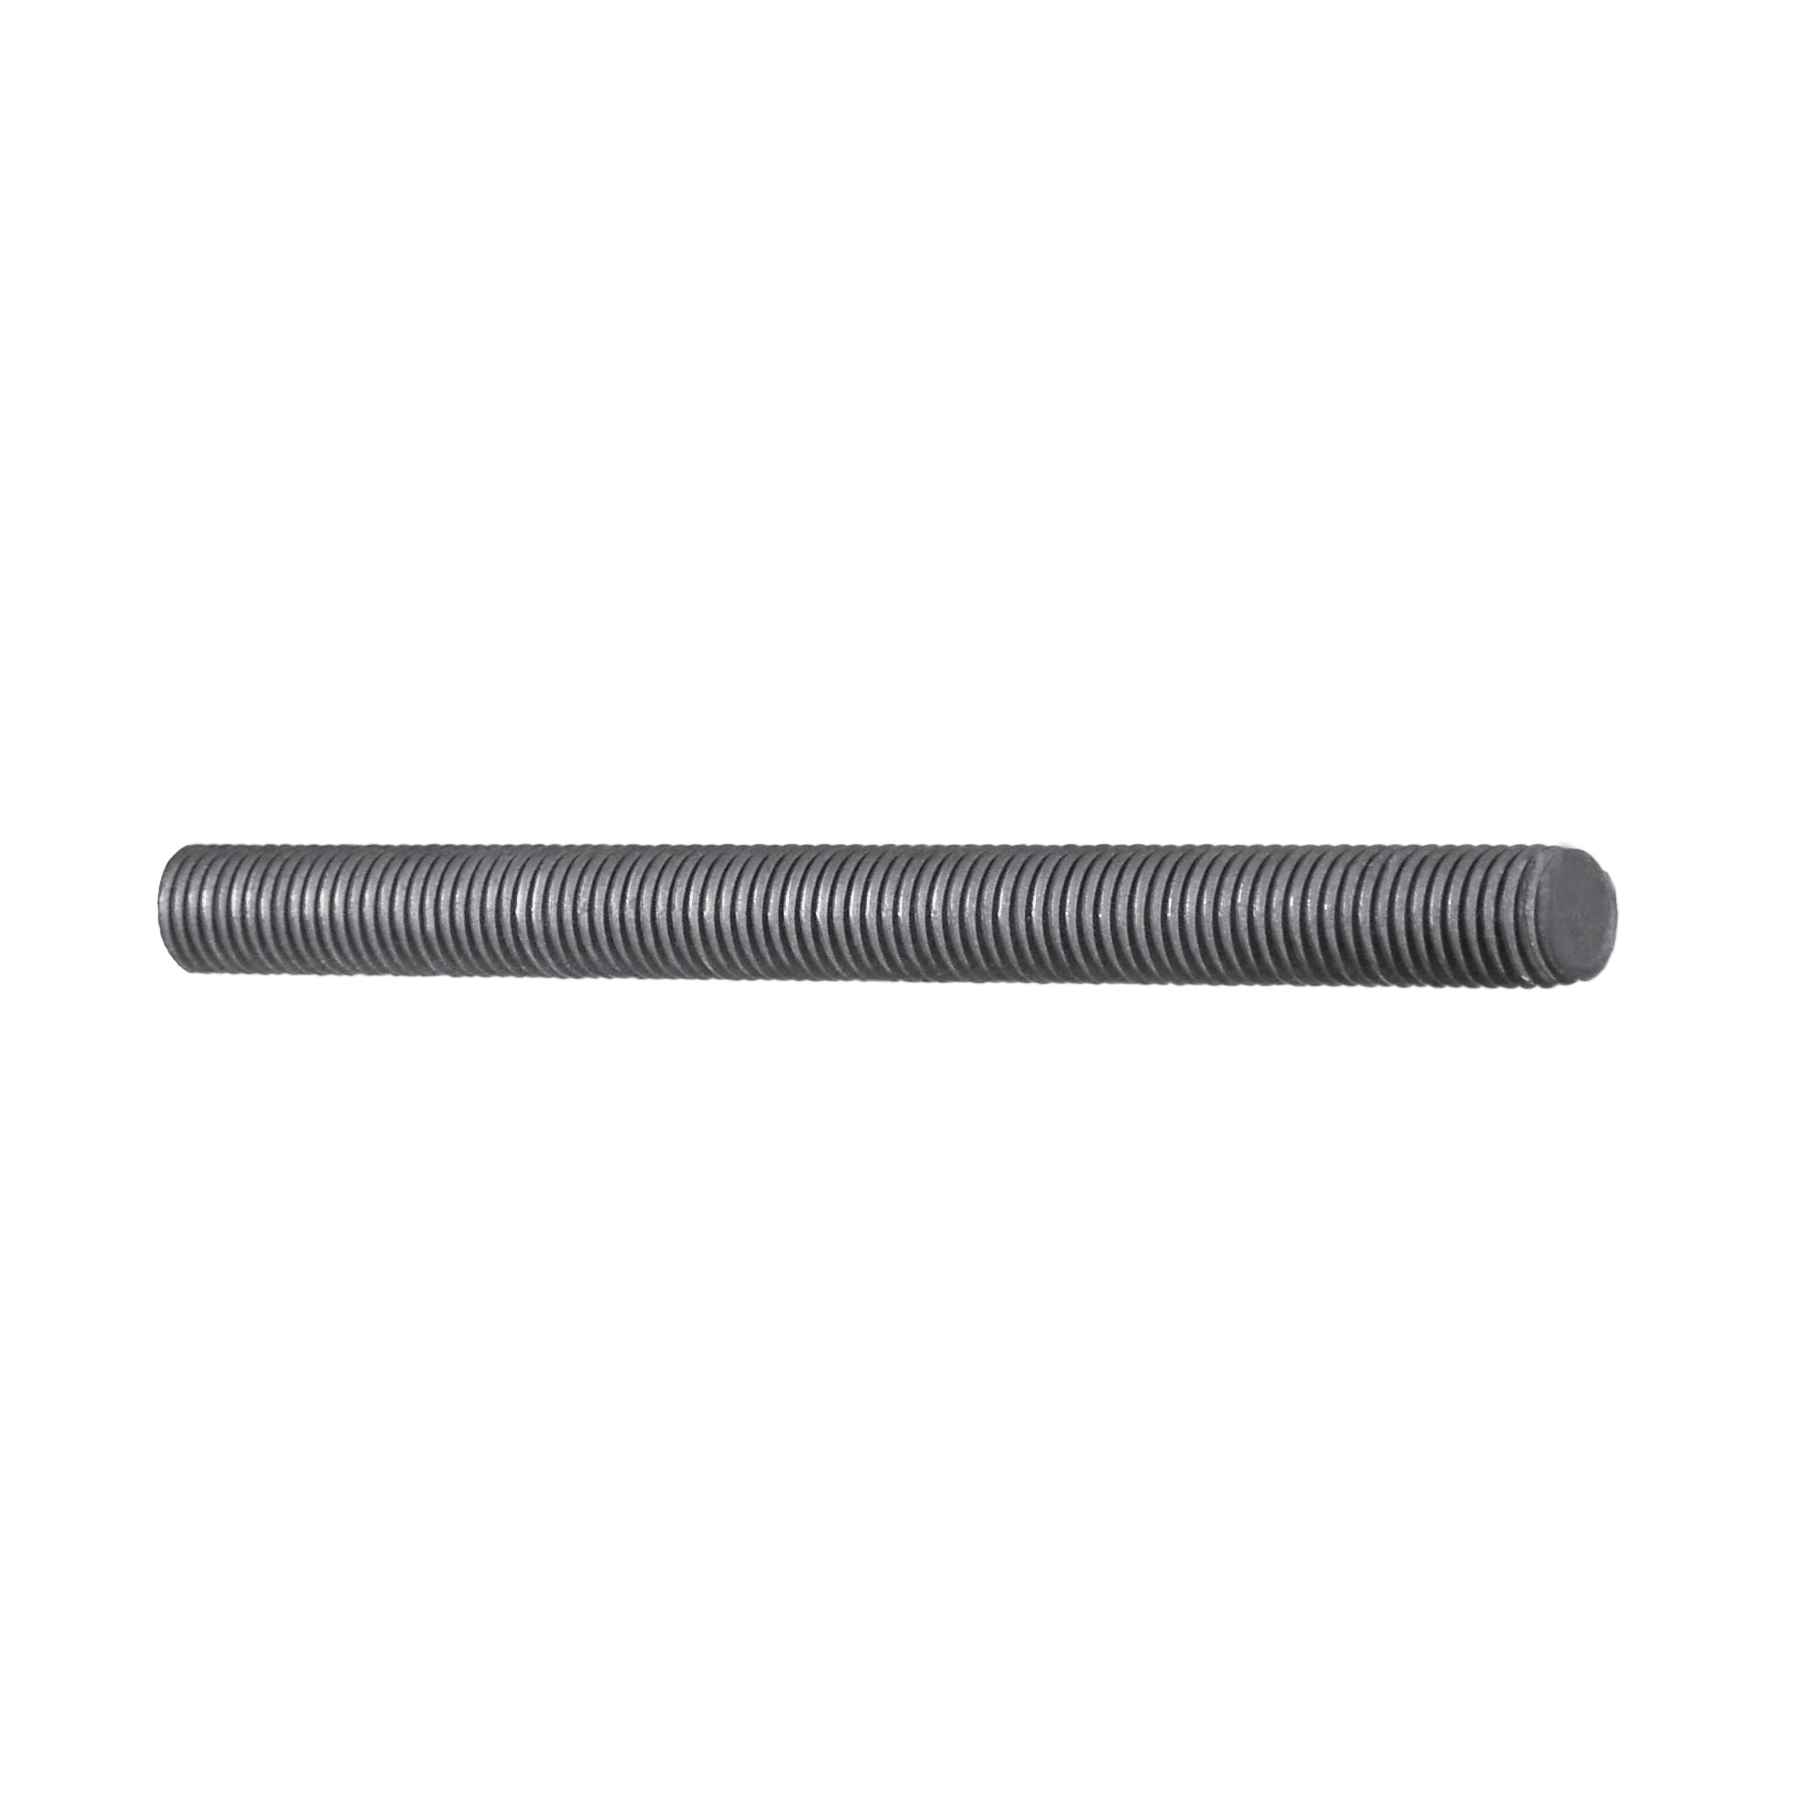 Anvil® 0500330519 FIG 146 Continuous Threaded Rod, 3/8-16, 10 ft OAL, Carbon Steel, Zinc Plated